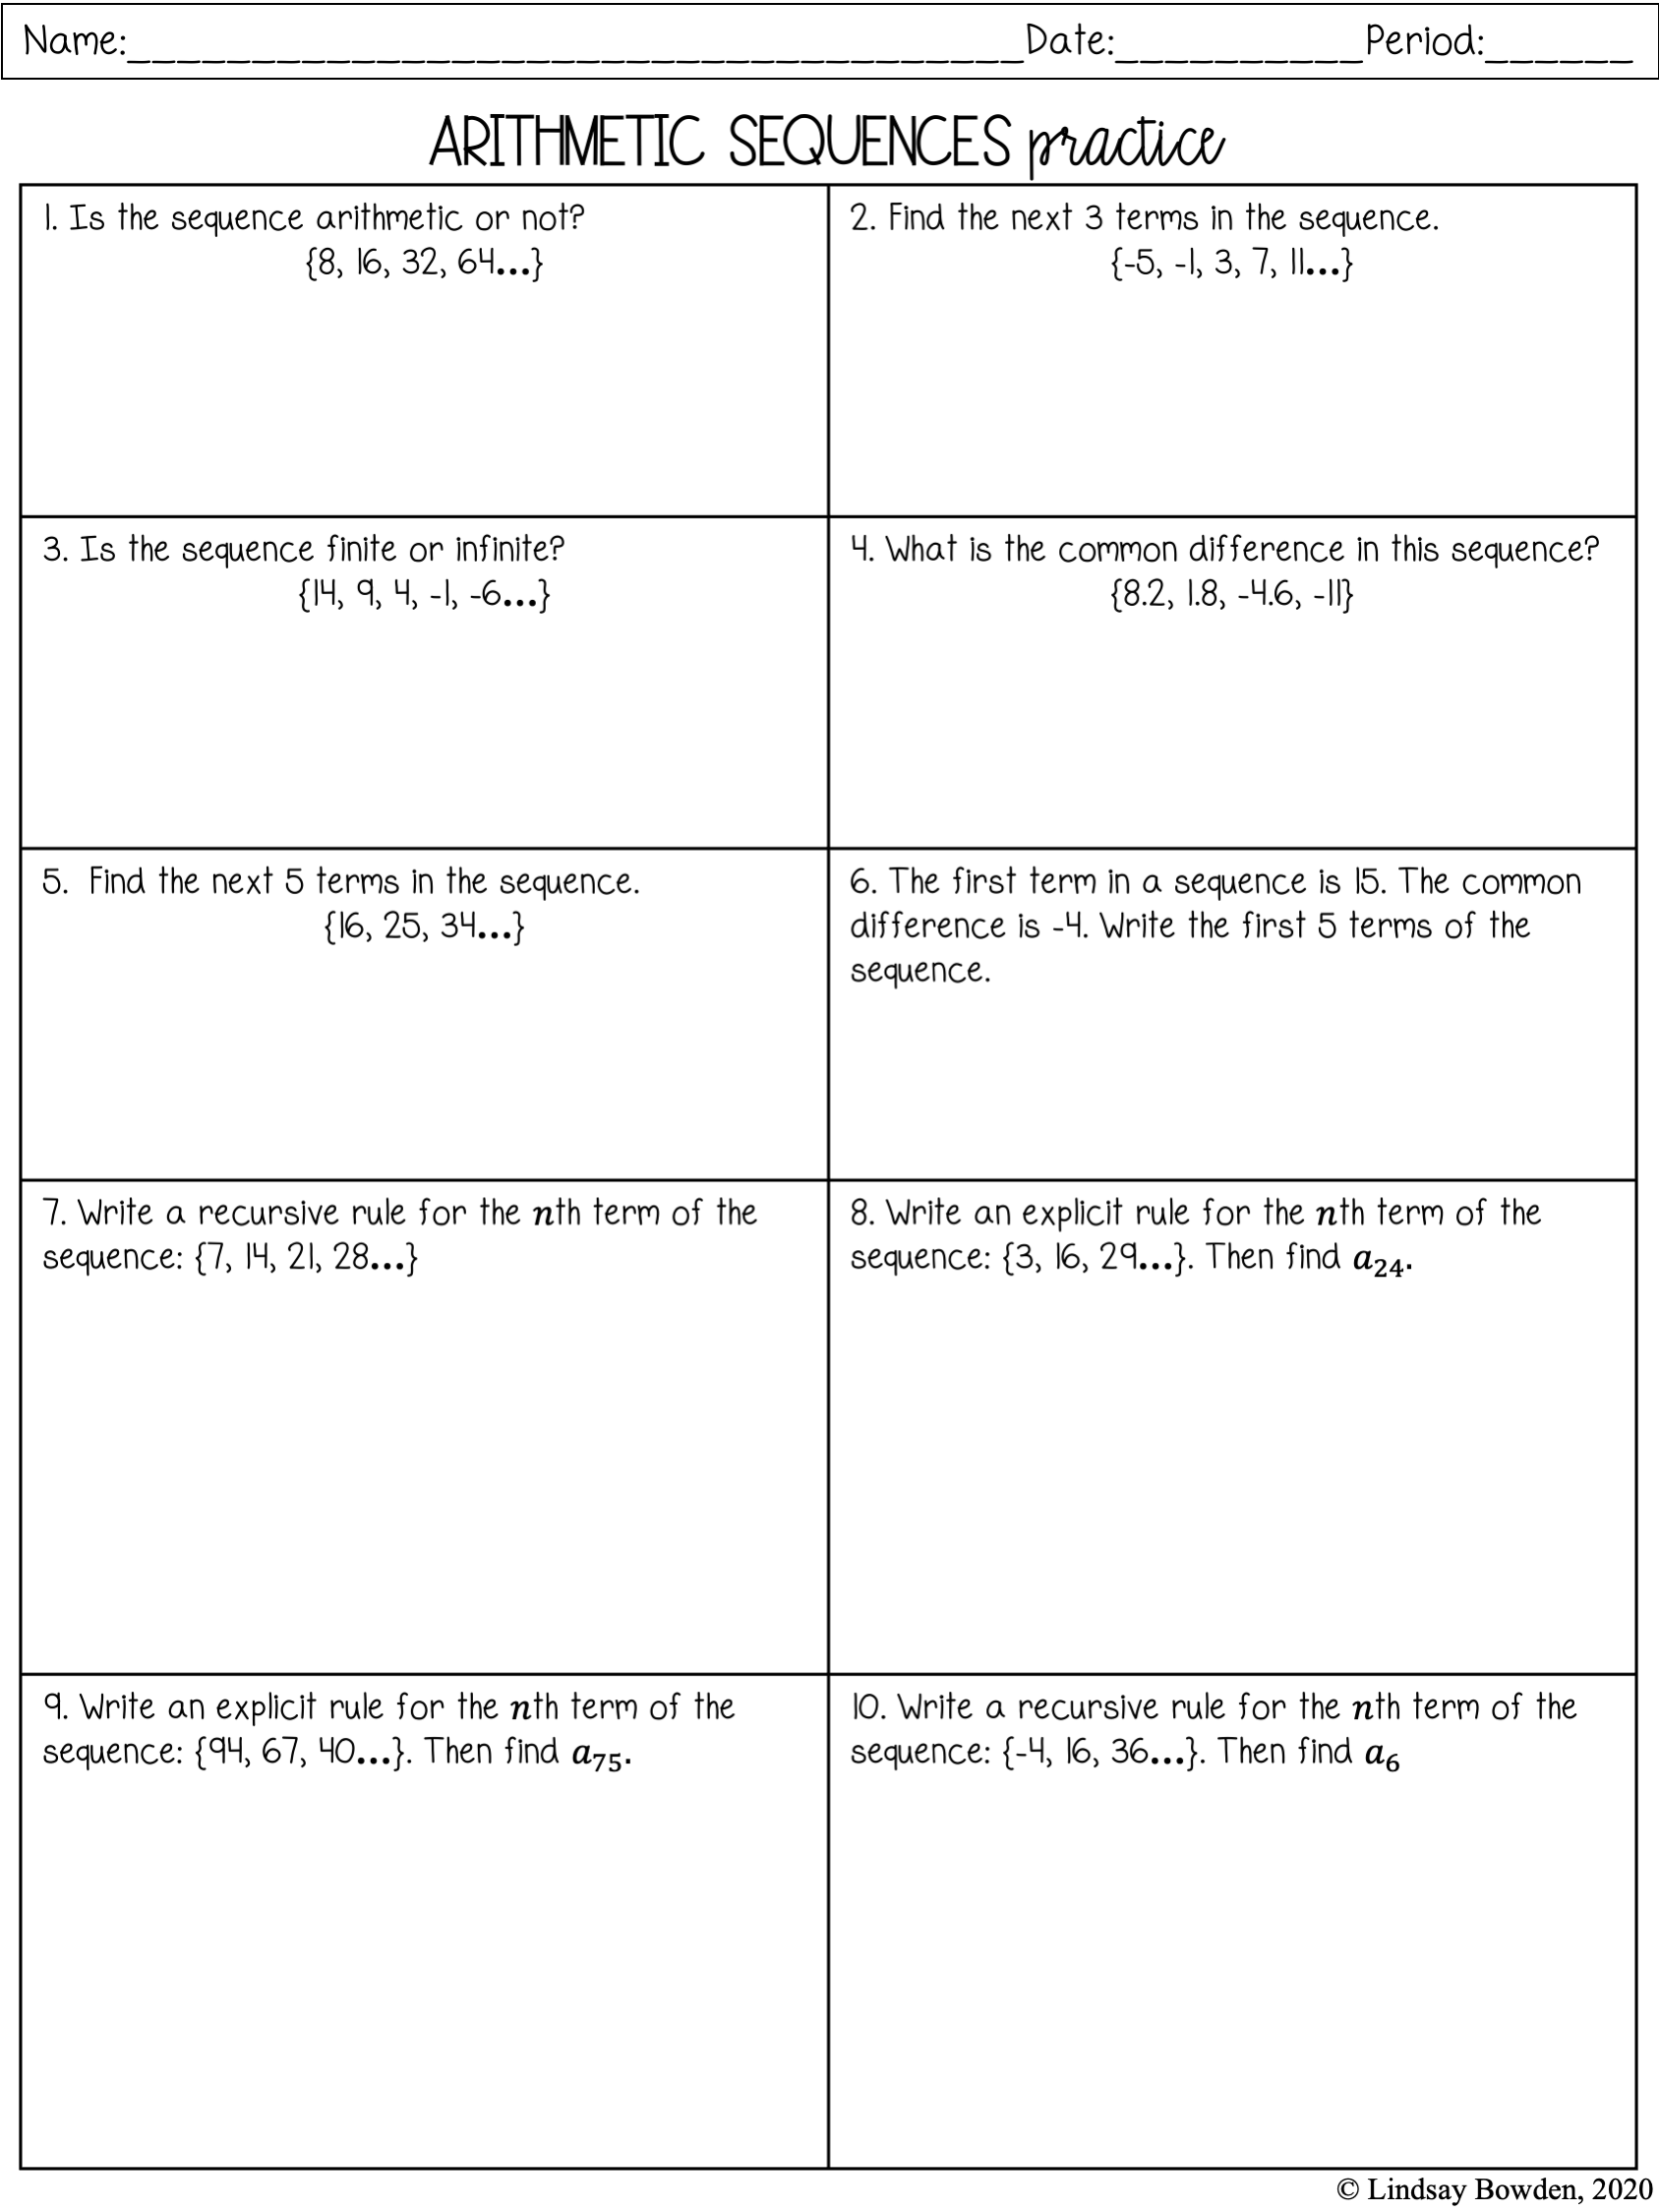 Arithmetic Sequences Notes and Worksheets - Lindsay Bowden Inside Arithmetic Sequences Worksheet Answers